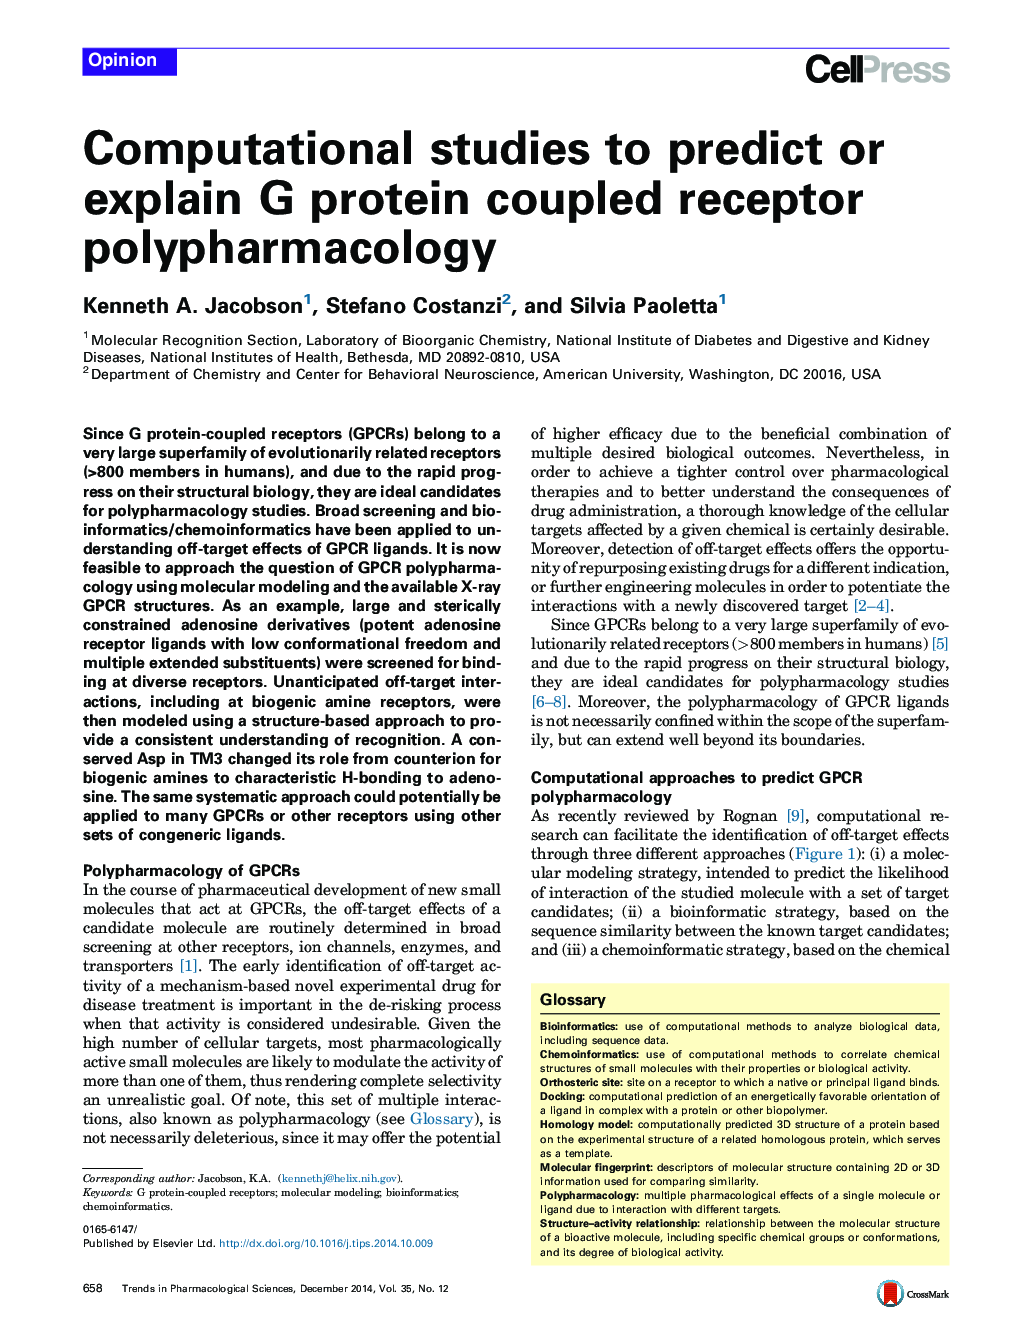 Computational studies to predict or explain G protein coupled receptor polypharmacology